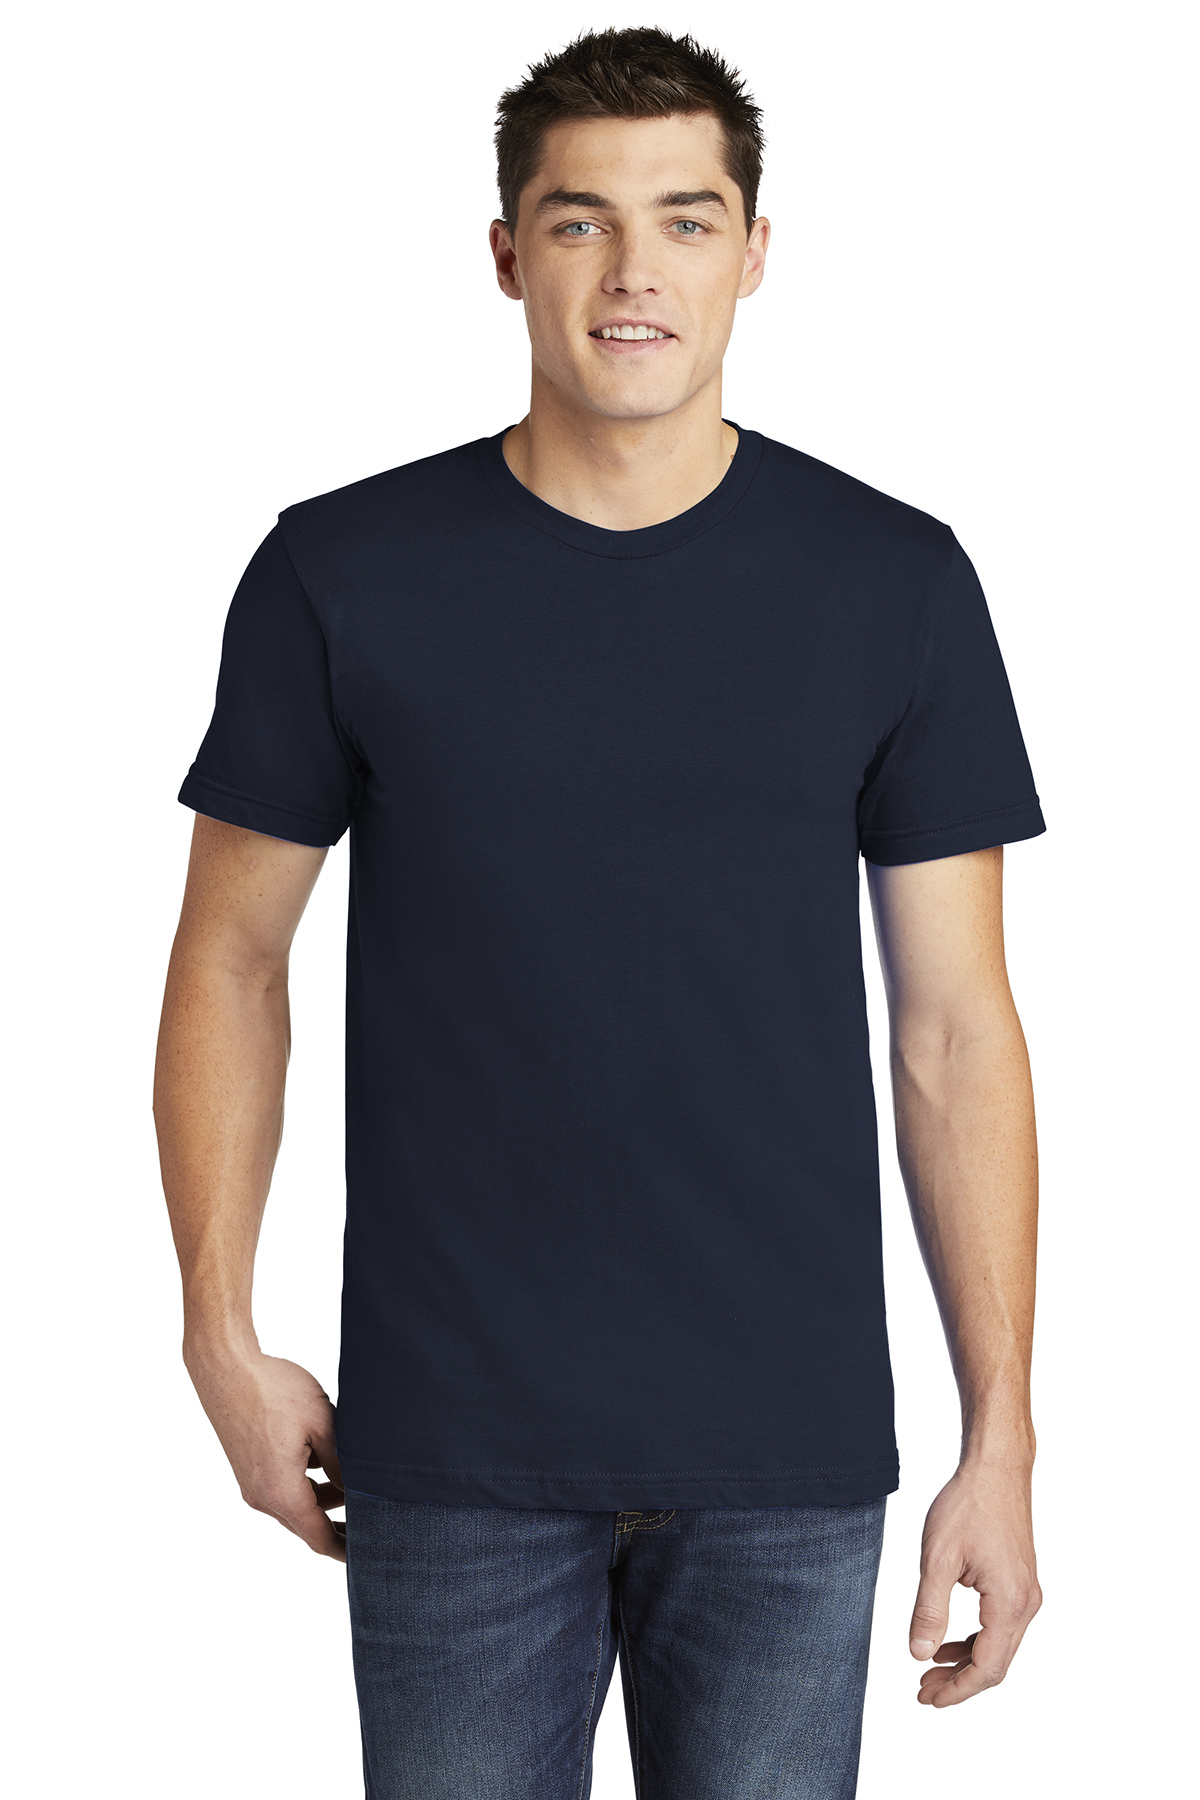 American Apparel USA Collection Fine Jersey T-Shirt | Product | SanMar